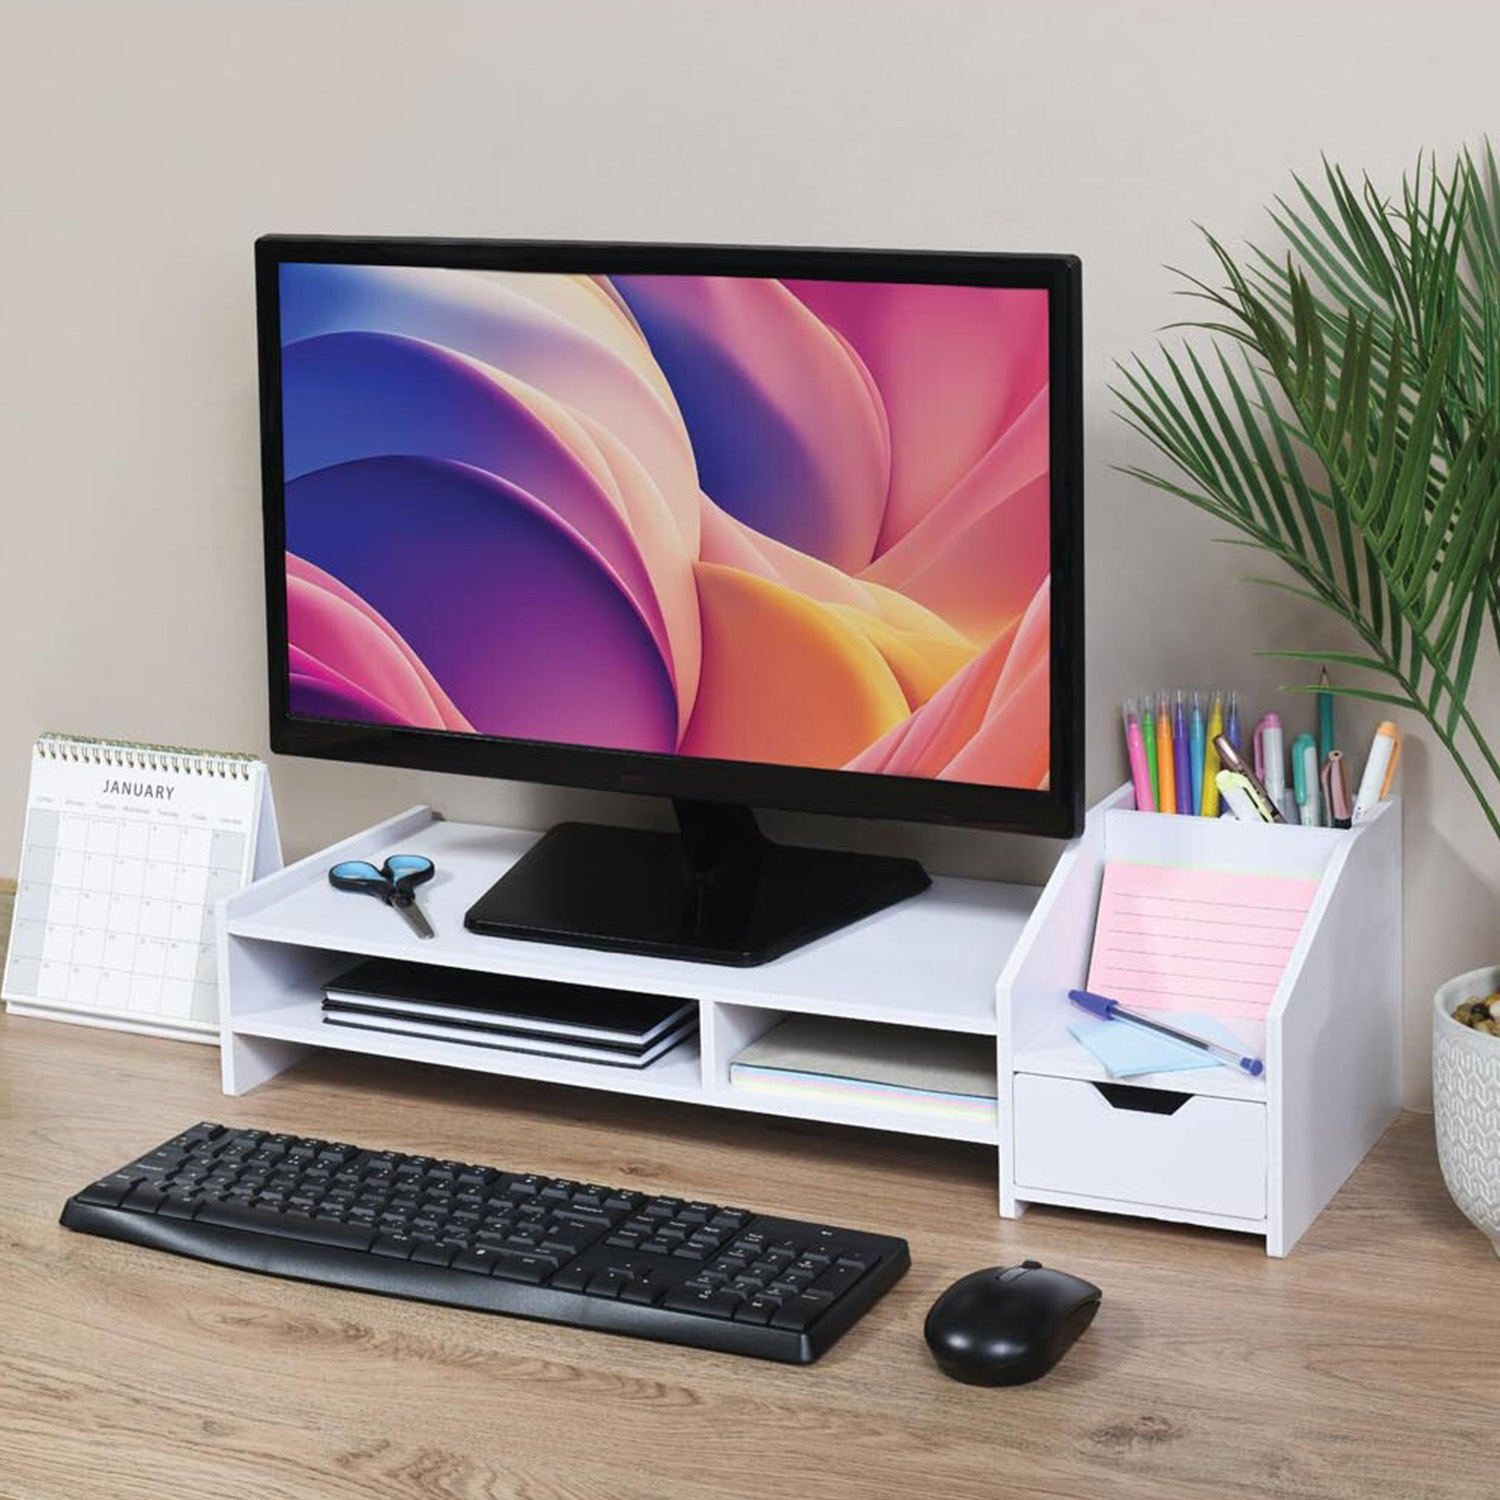 Flatpack Monitor Stand - White Image 1